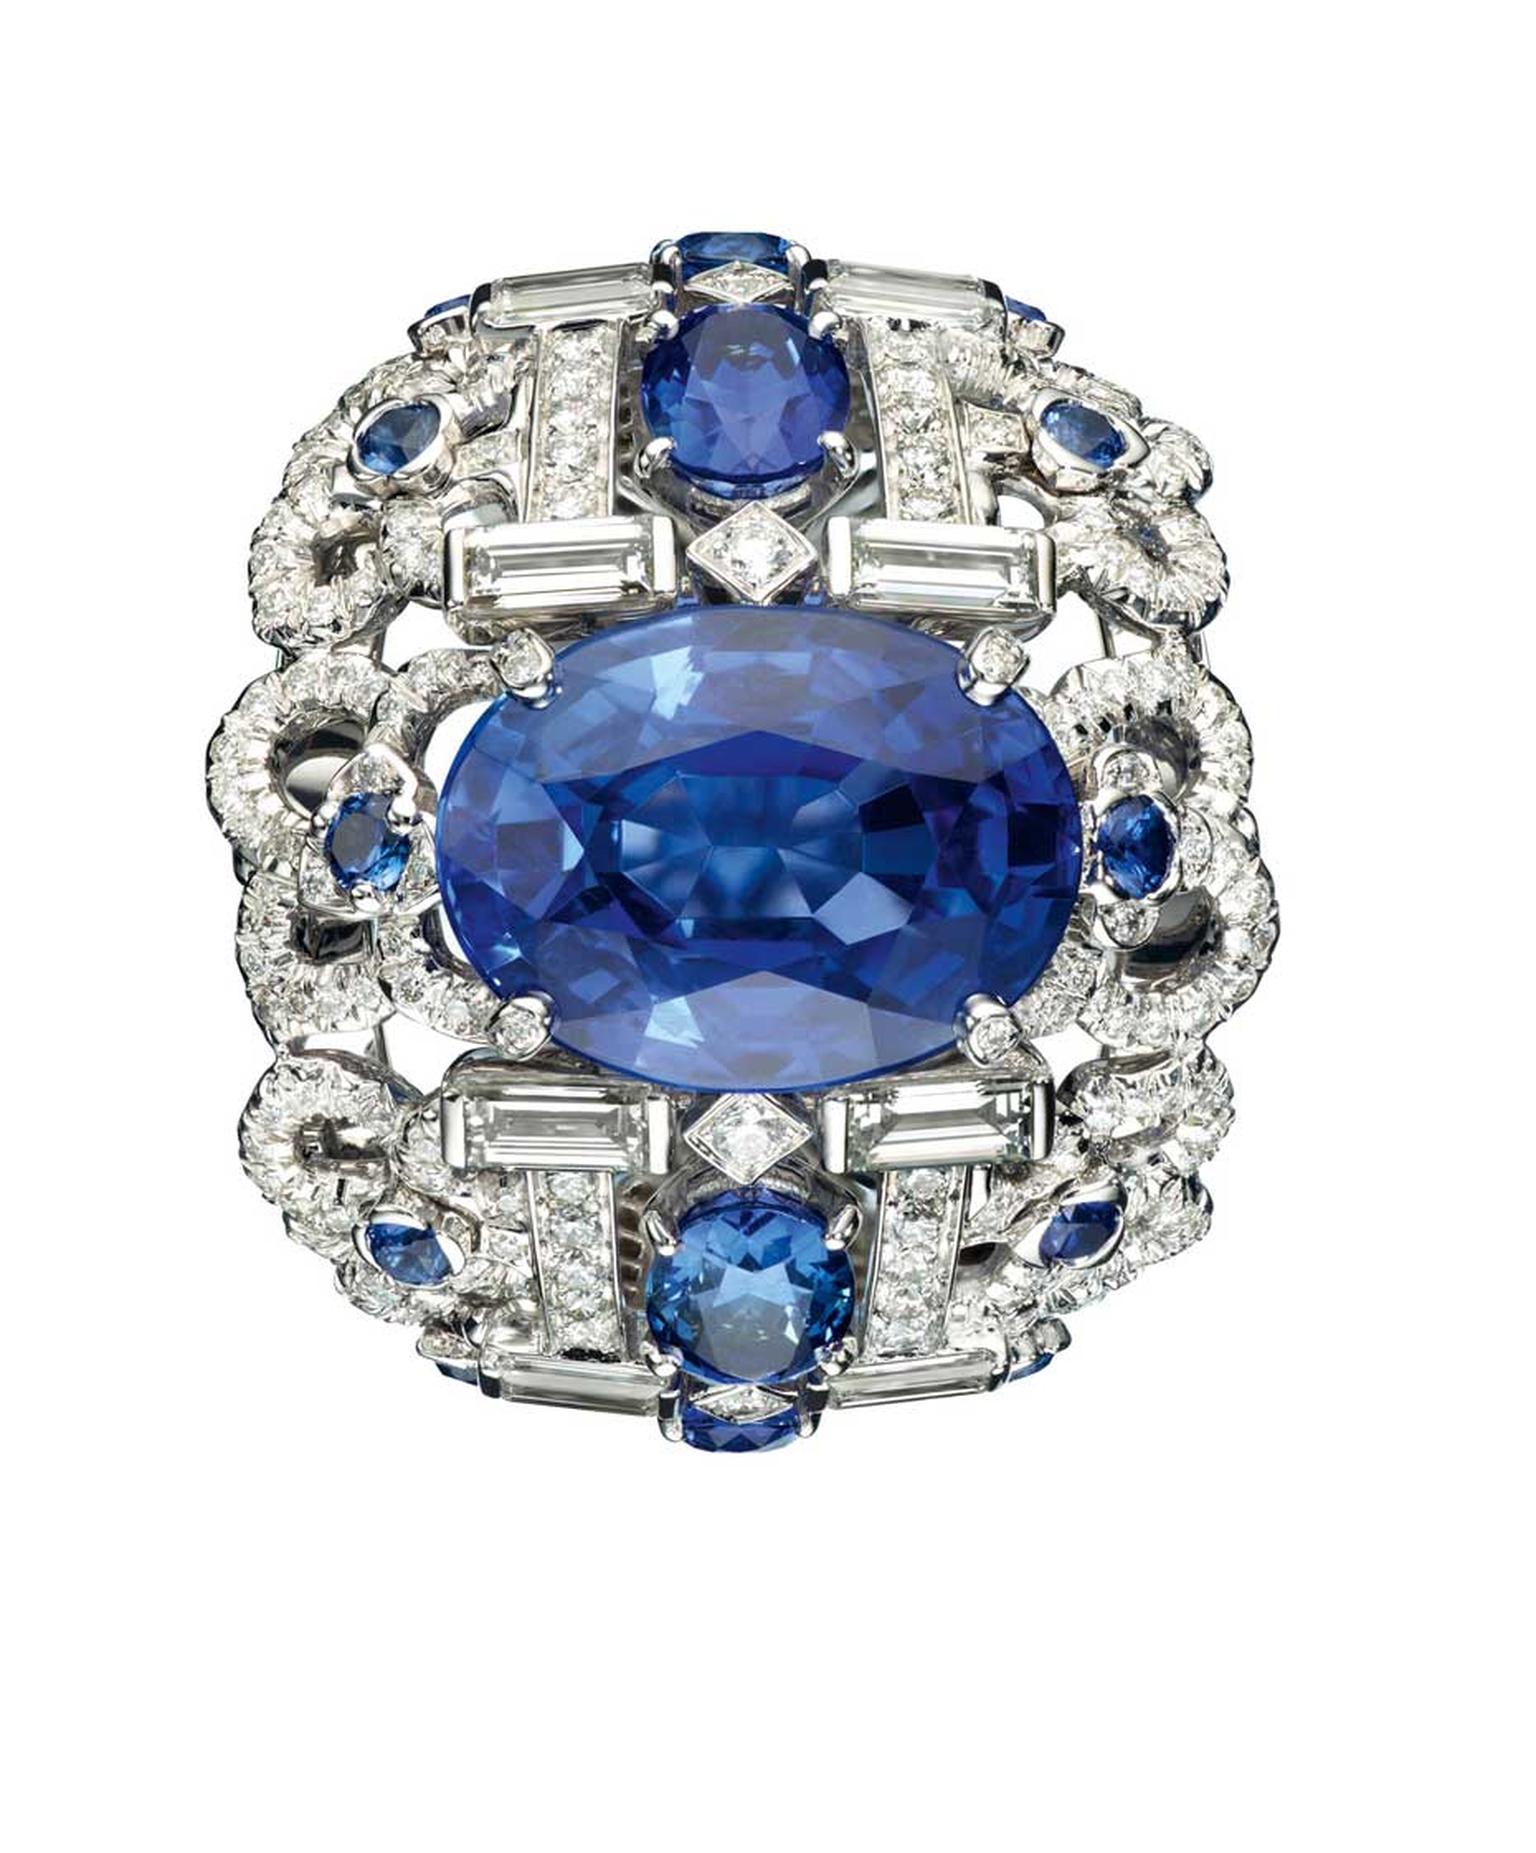 Chaumet white gold Hortensia ring with diamonds, sapphires and set with a centre oval-cut sapphire (9.85ct).